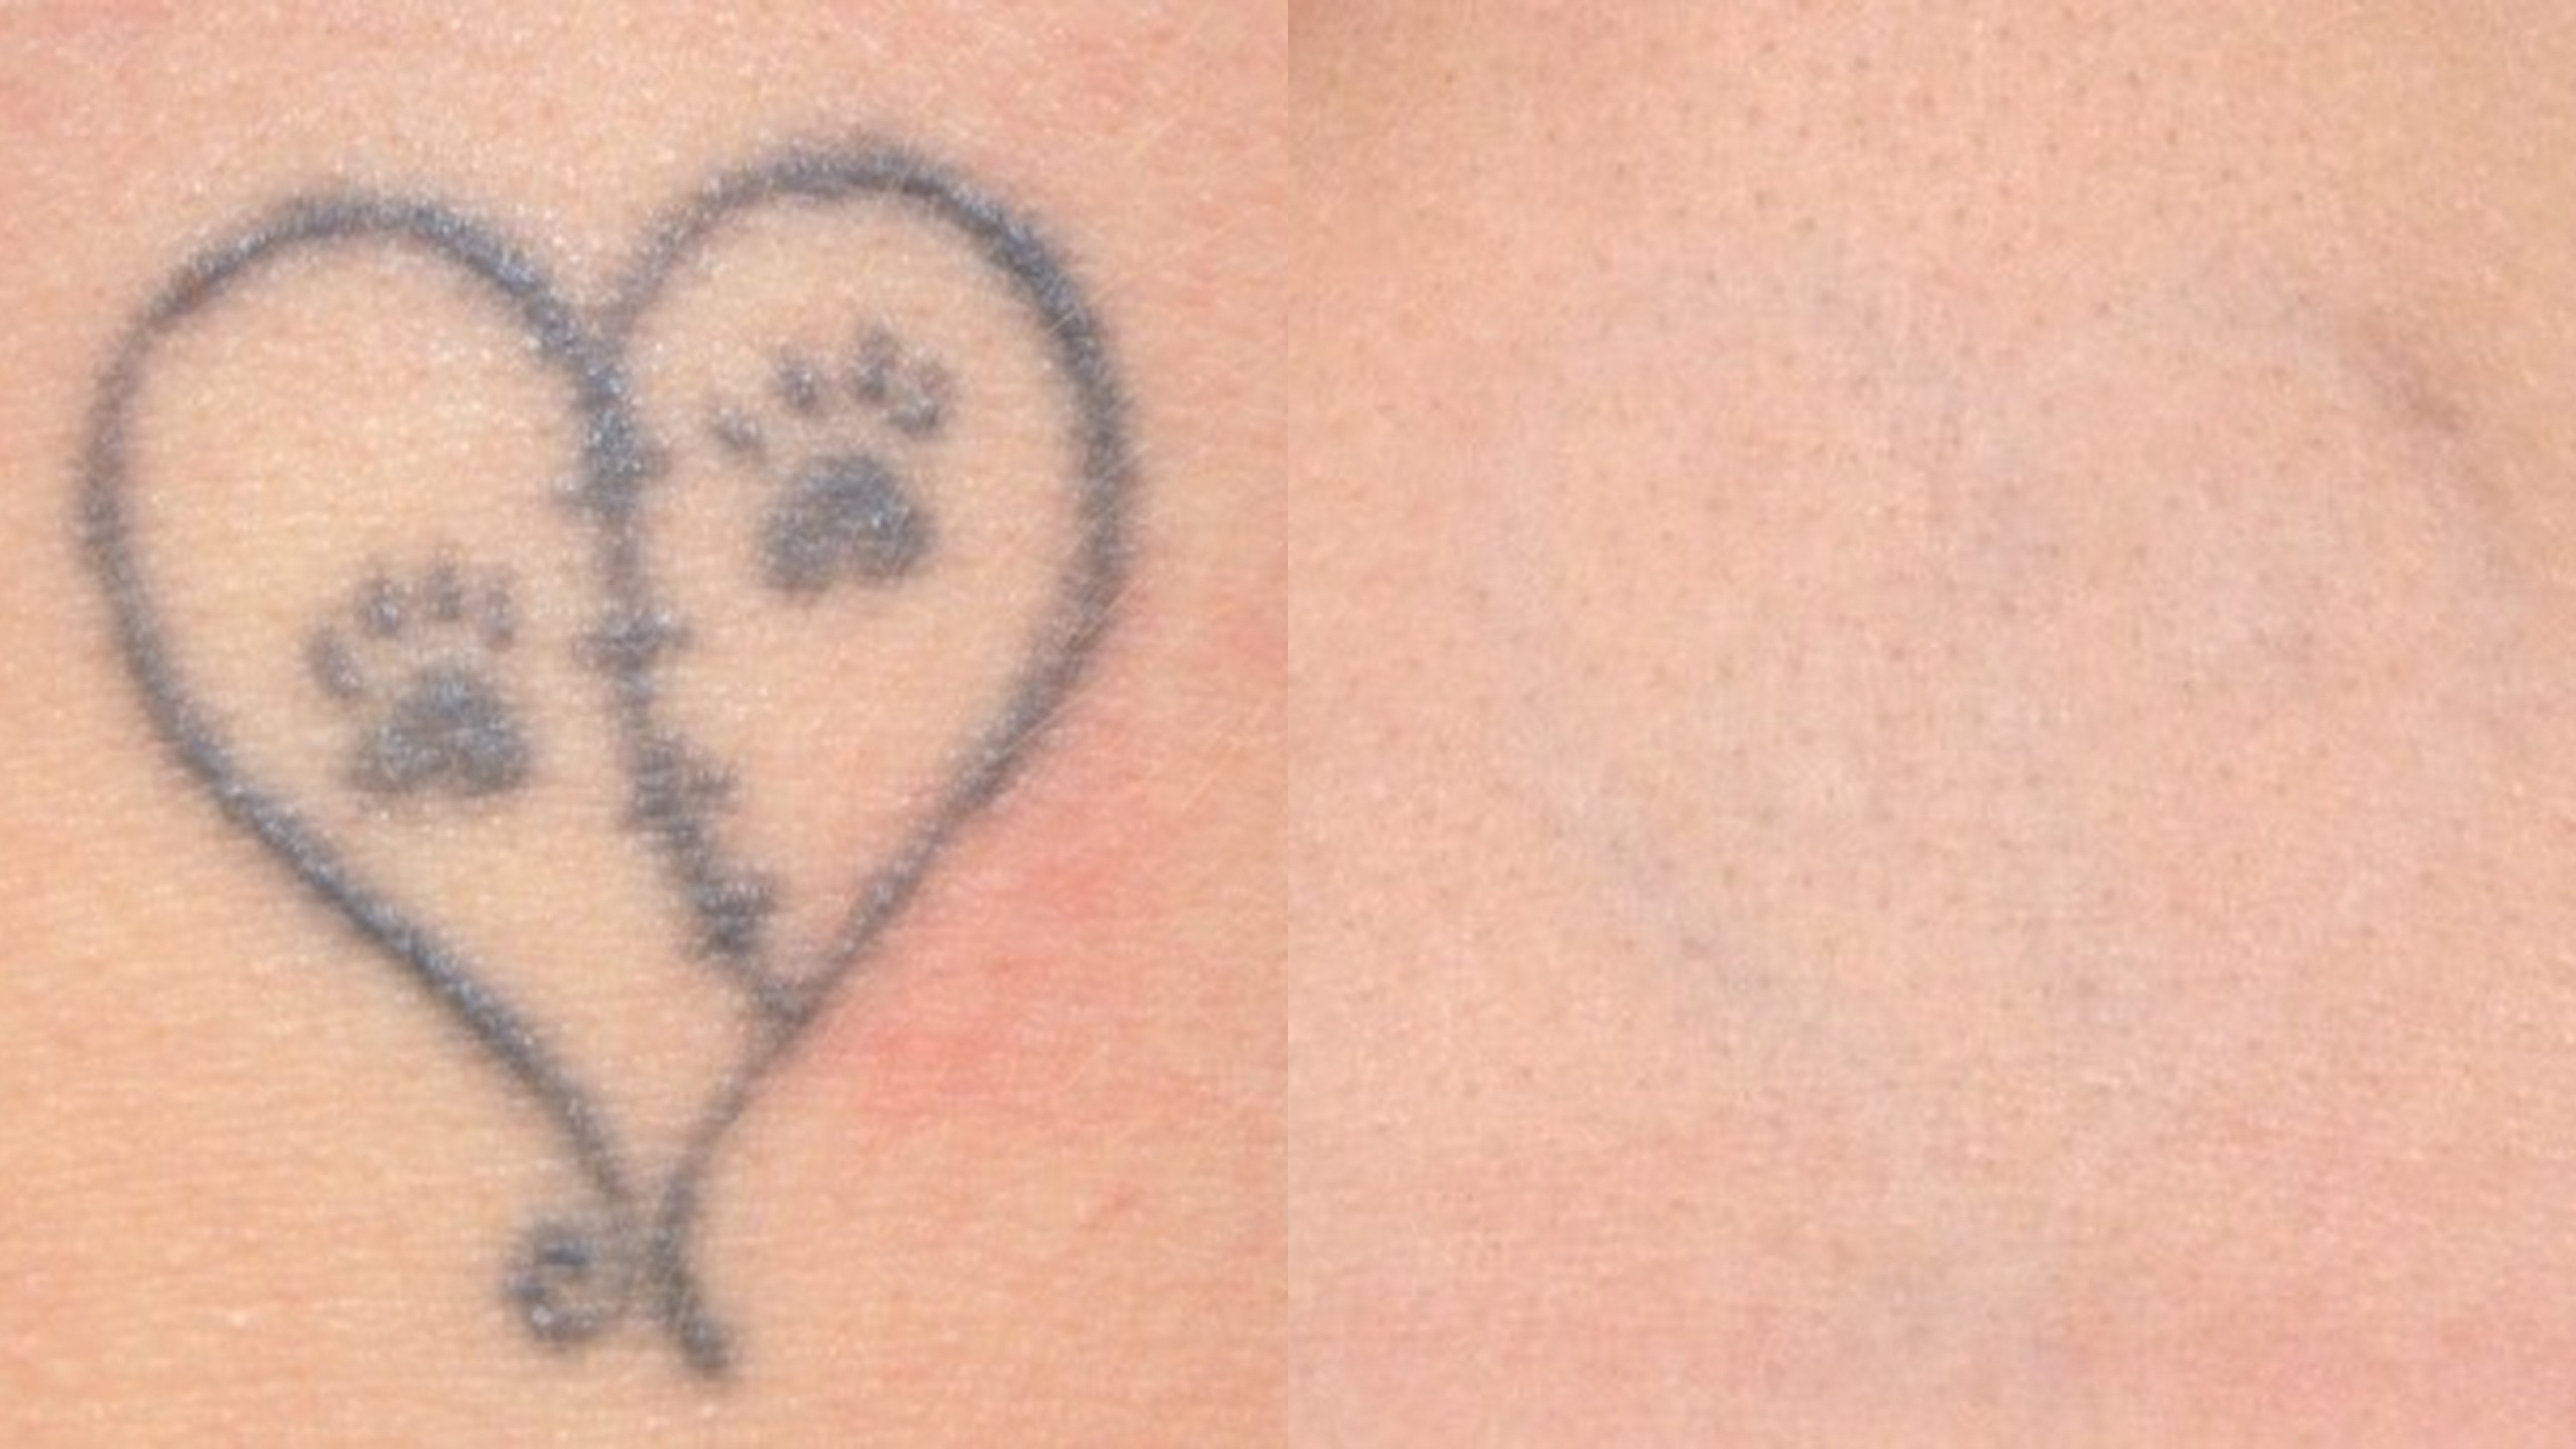 LASER Tattoo Removal, Tattoo Surgery and other methods: All you need to  Know | Visakha Institute